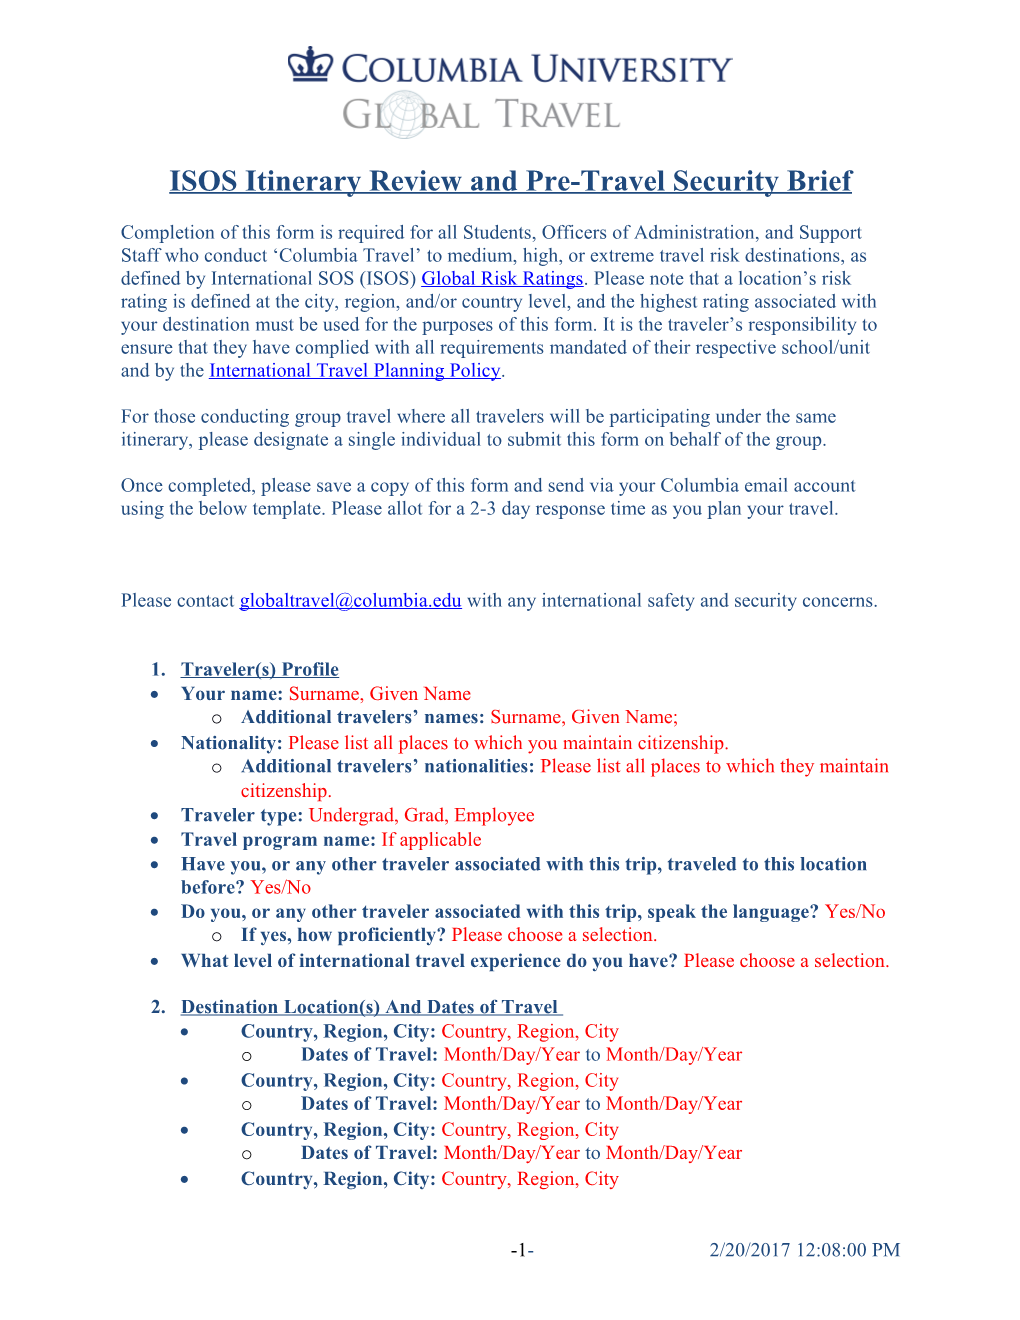 ISOS Itinerary Review and Pre-Travel Security Brief